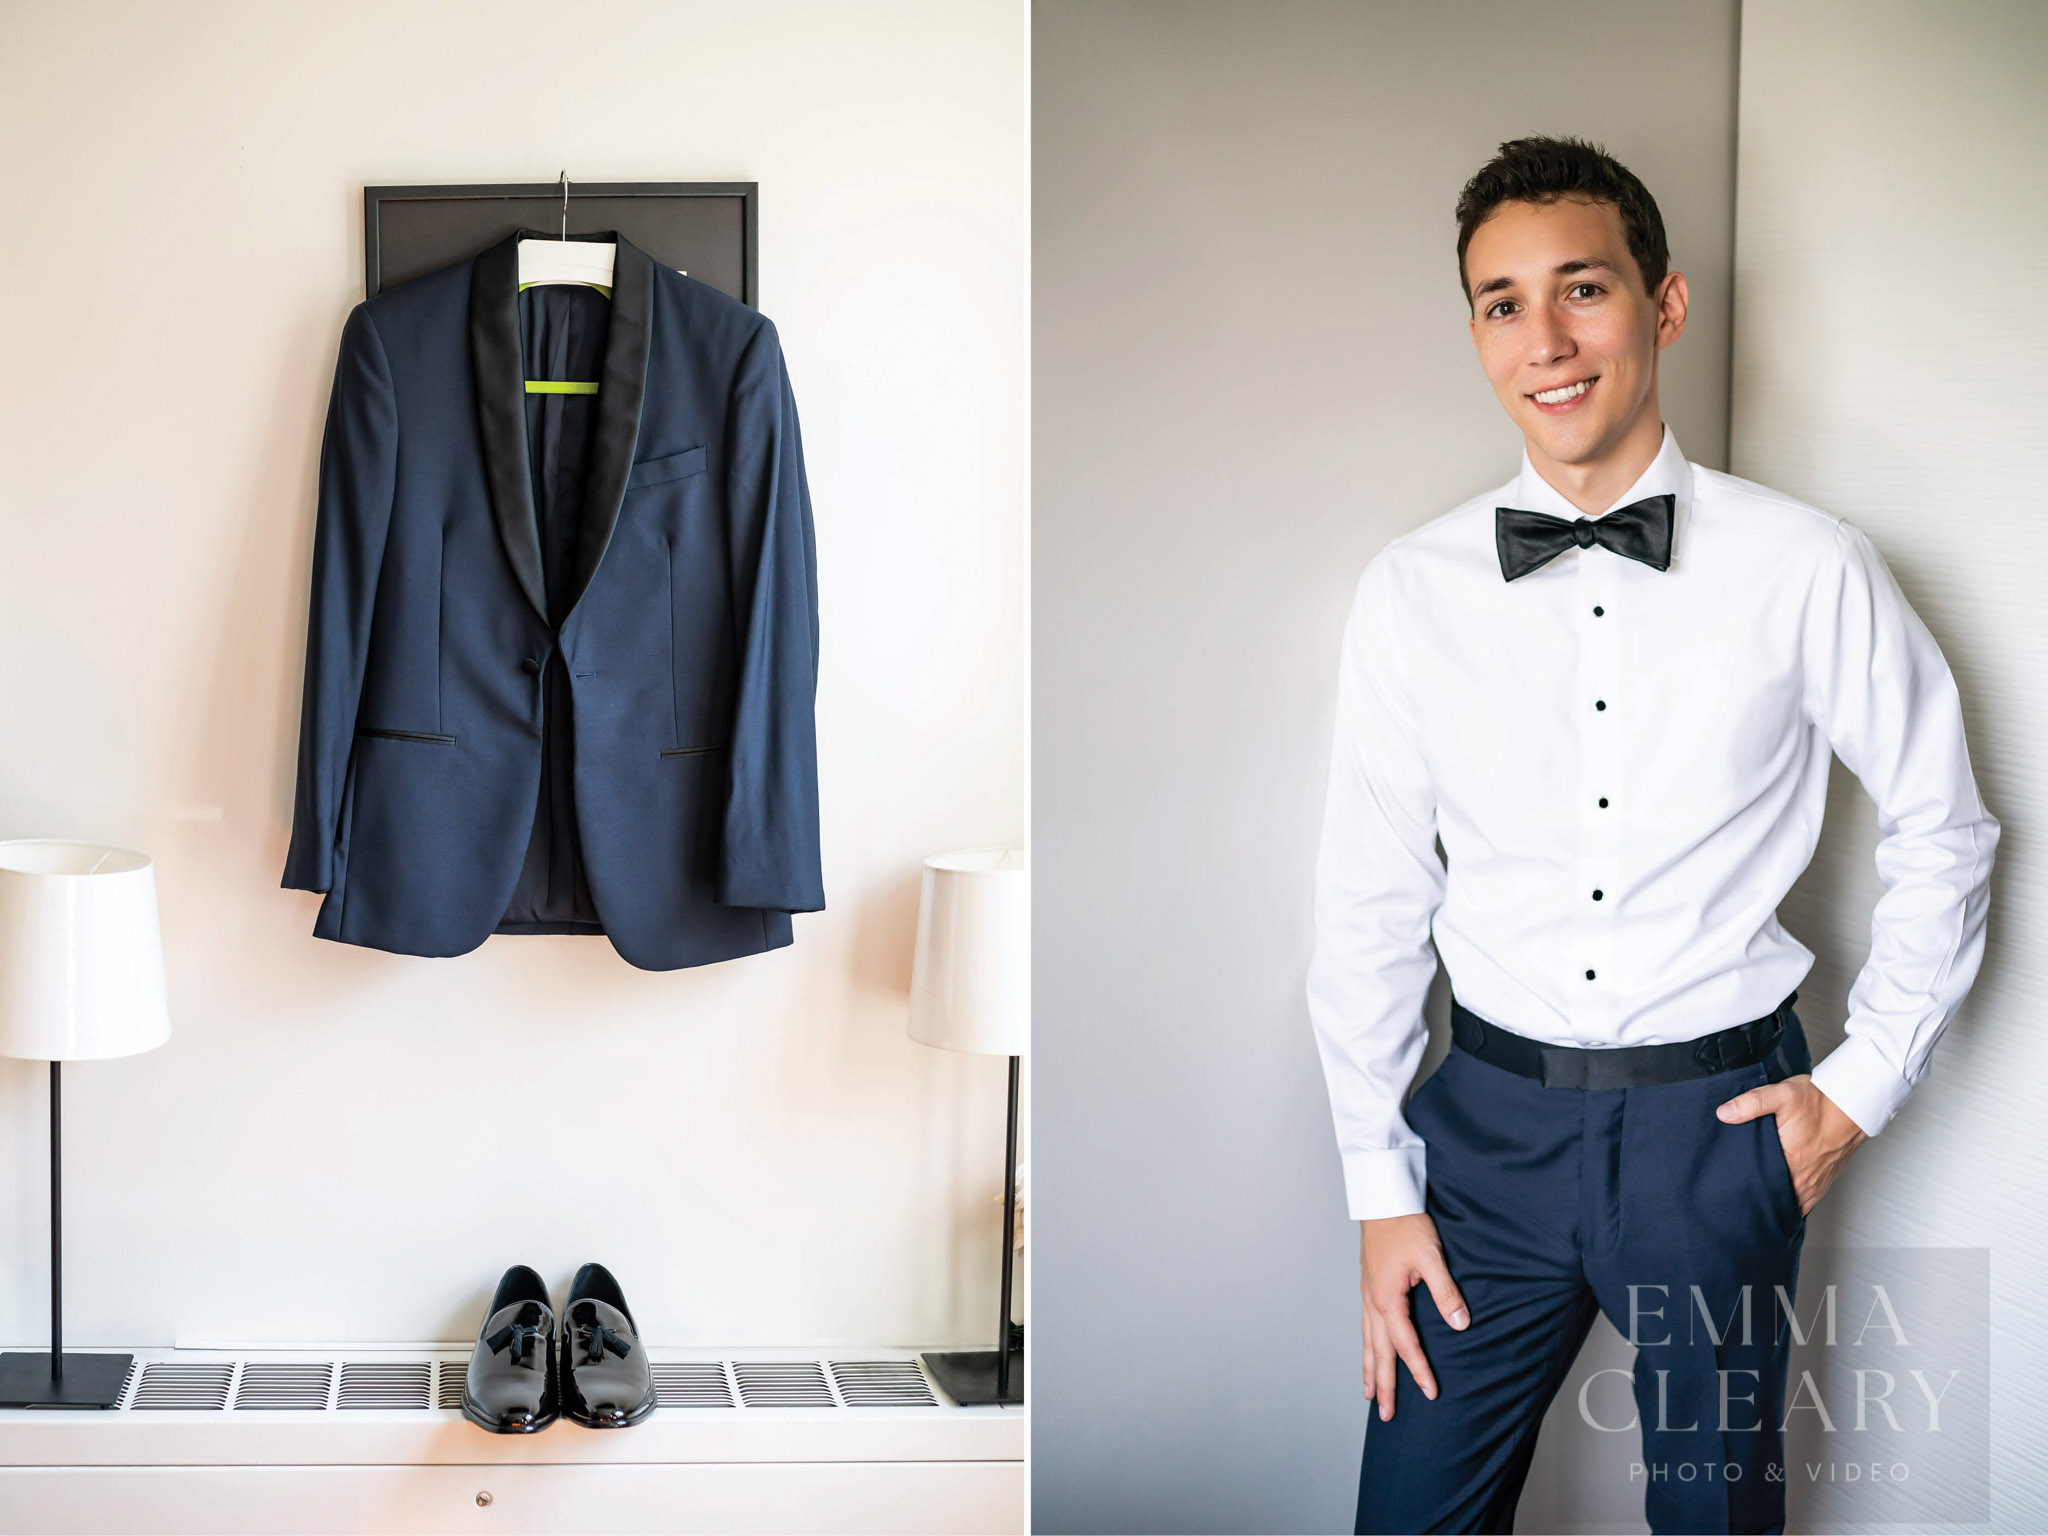 The groom and his suit